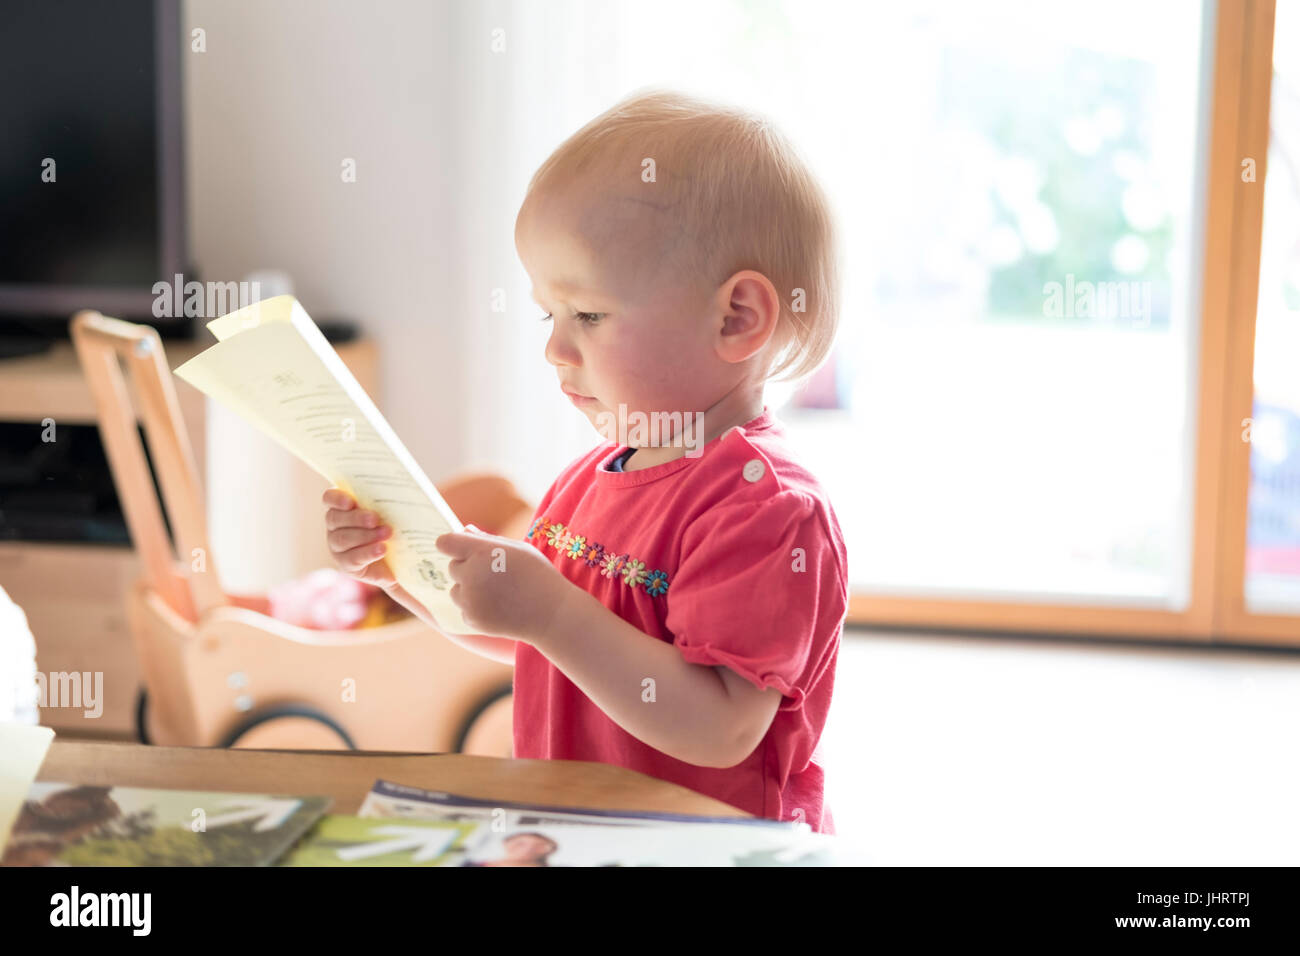 Toddler looking very interested at a text, Germany Stock Photo